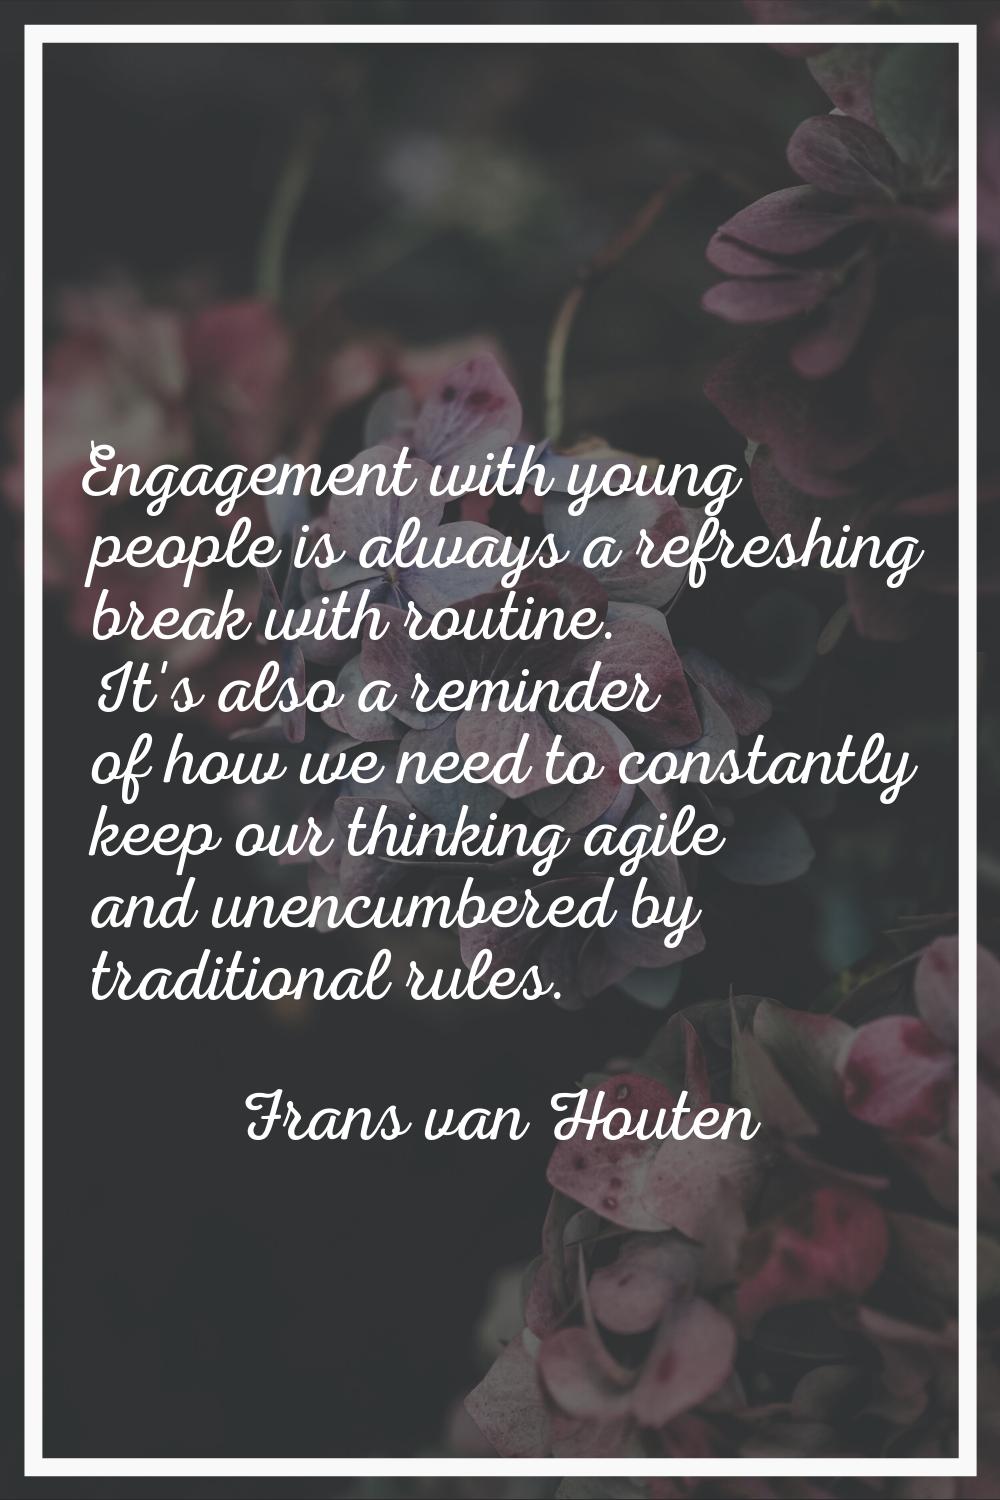 Engagement with young people is always a refreshing break with routine. It's also a reminder of how